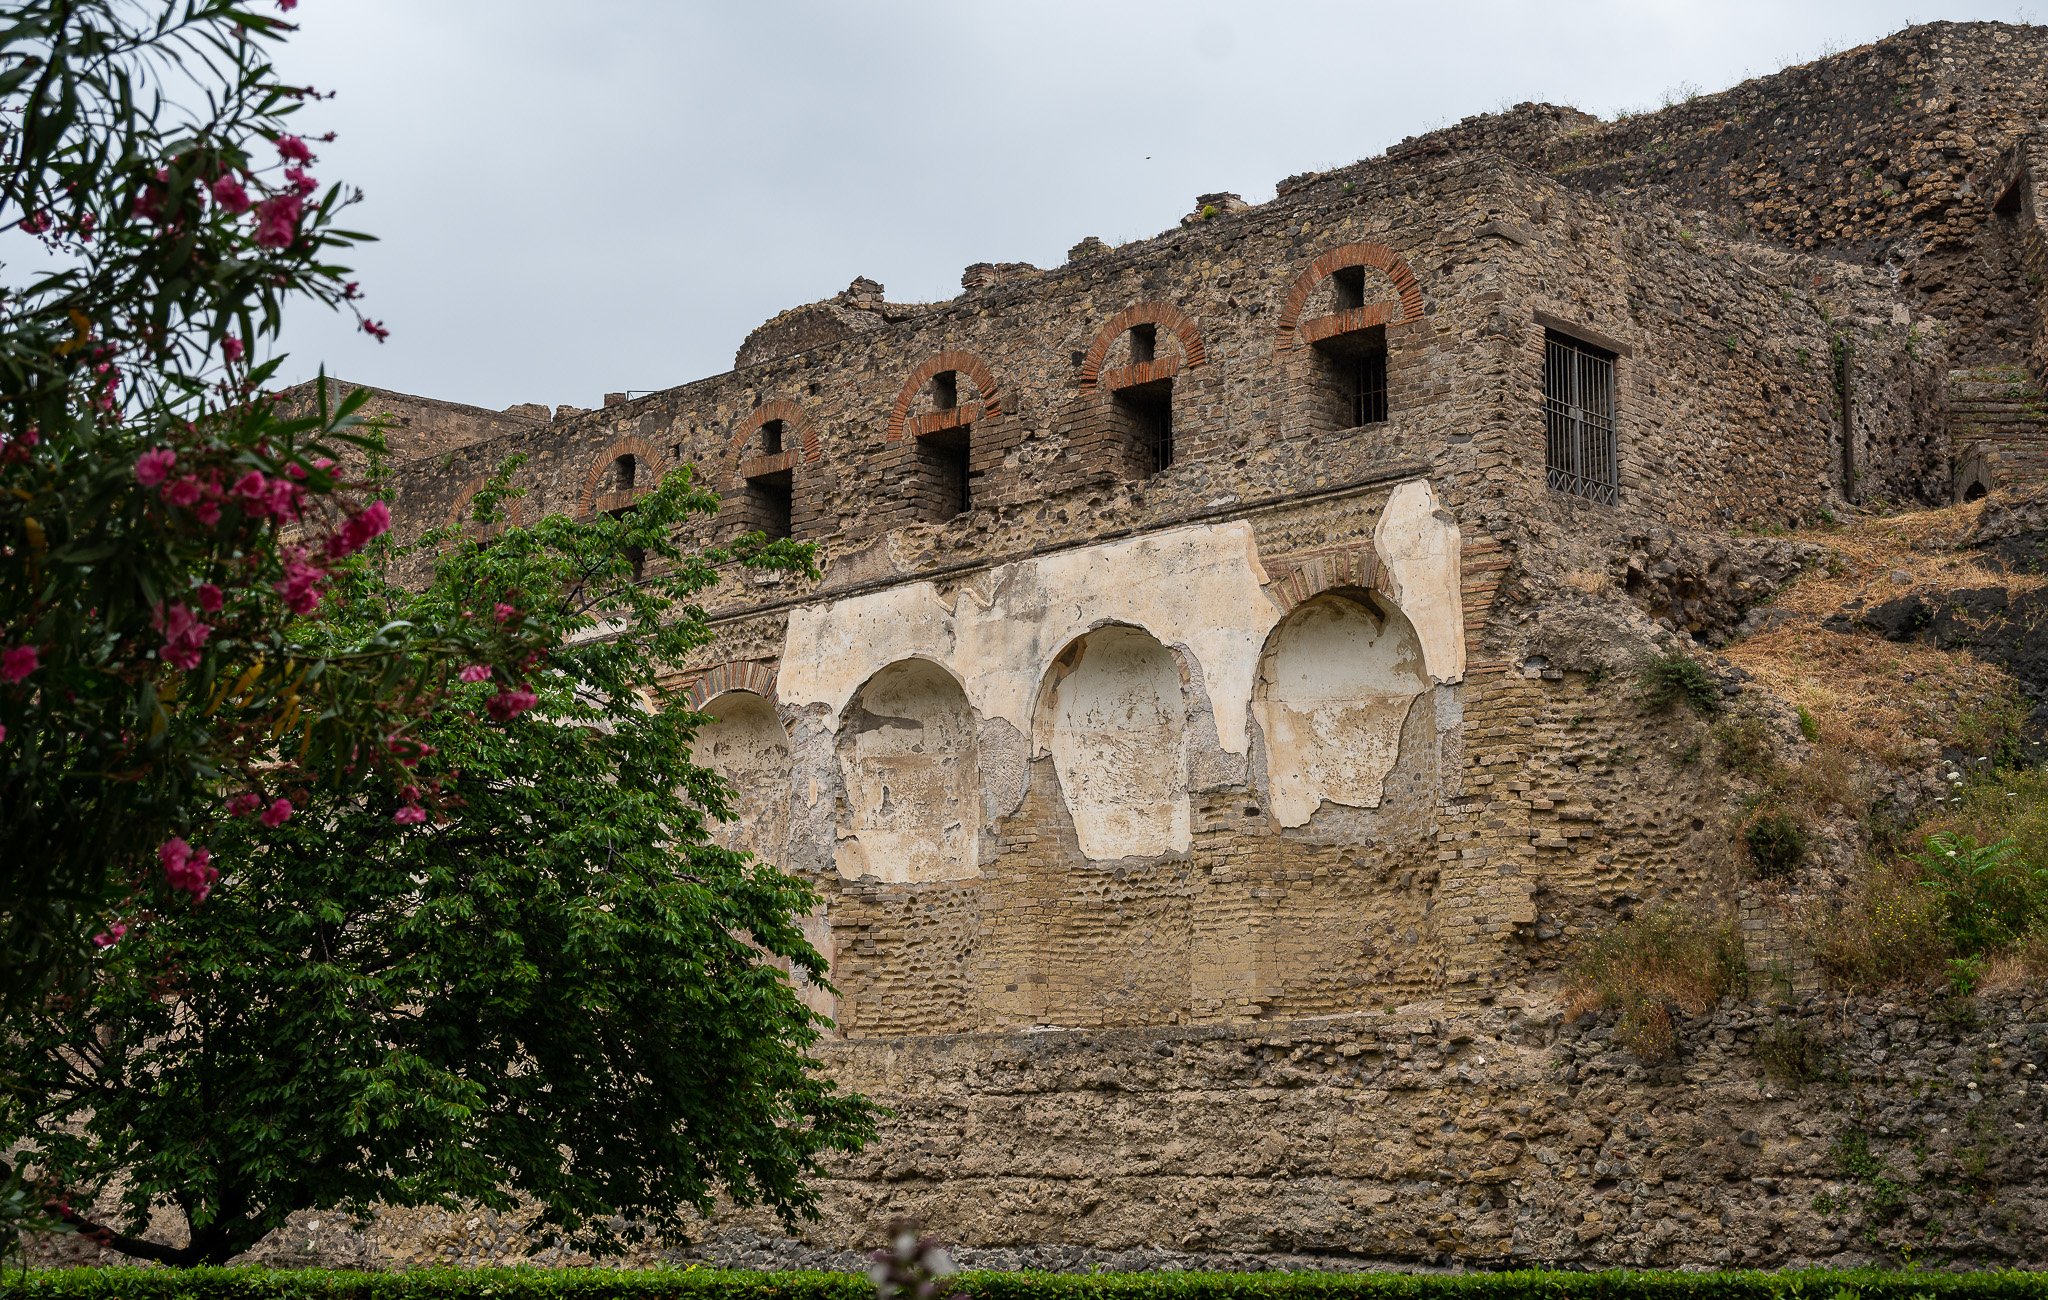 The outer walls of the city -- Pompeii